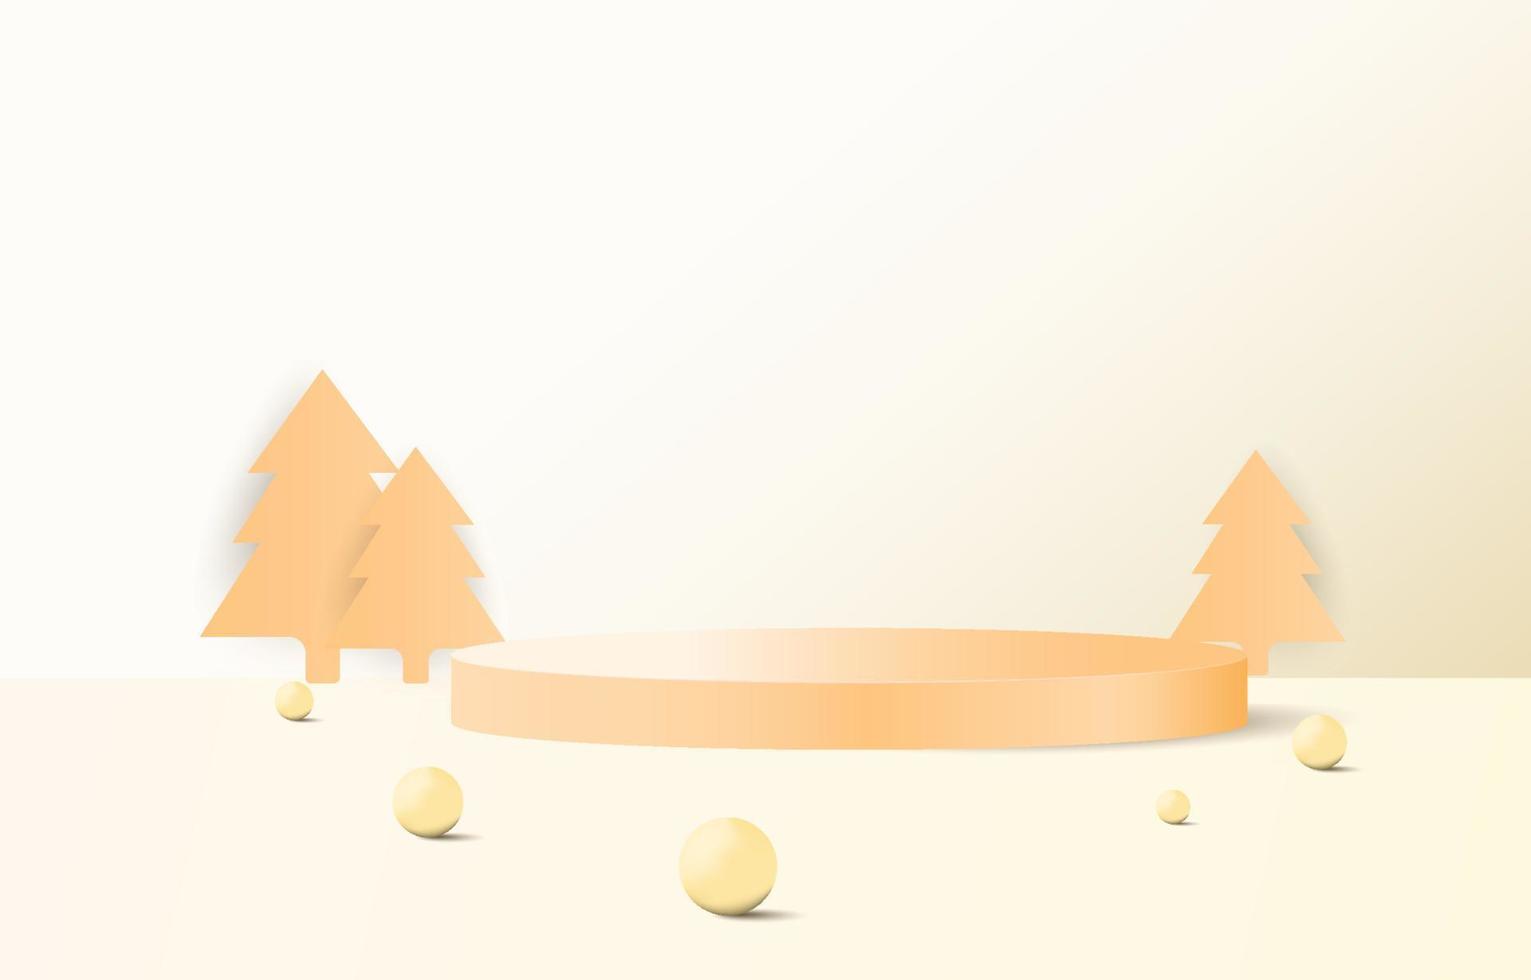 Gold Christmas podium decorated with pine trees and golden balls. Empty cylinder mockup background image concept. Vector for design sales and product advertising materials.